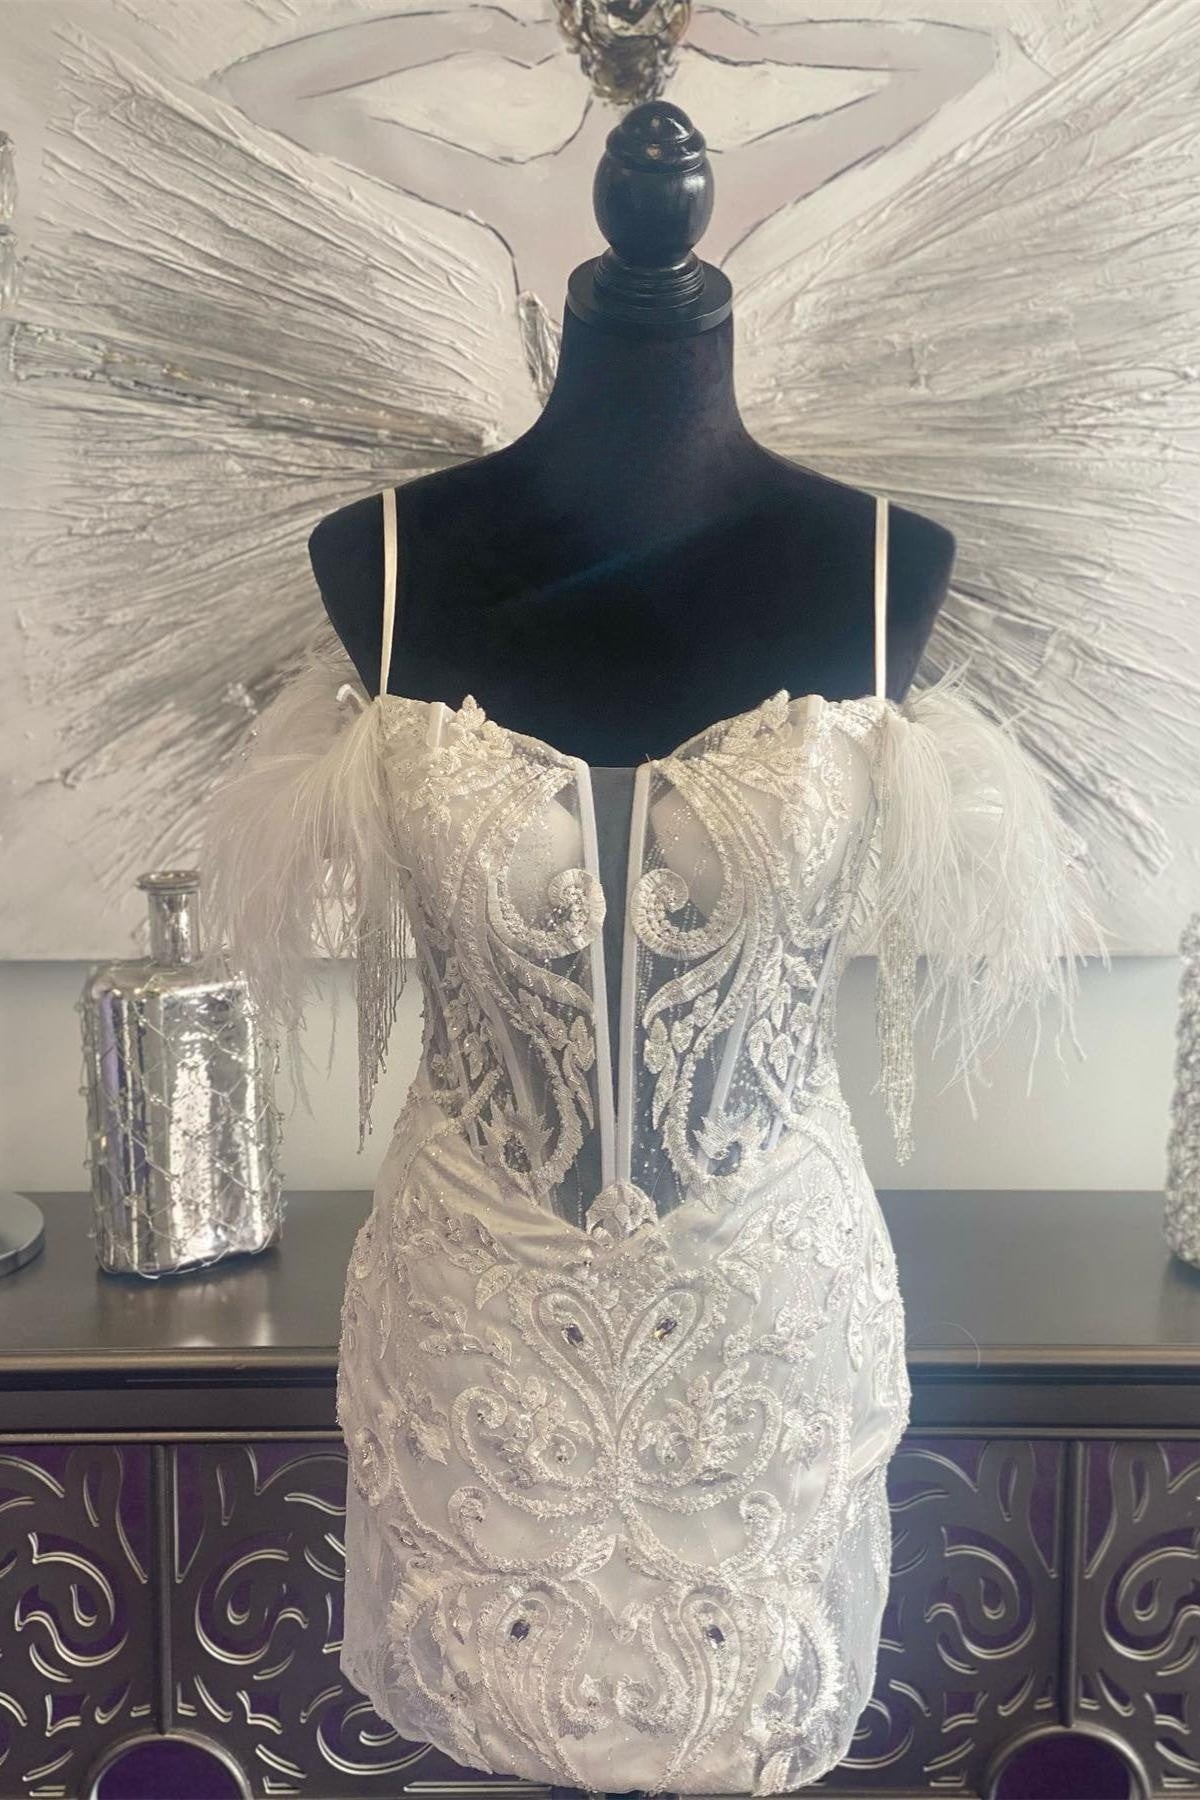 White Plunging V Neck Off-the-Shoulder Appliques Corset Homecoming Dress with Feathers outfit, Shirt Dress